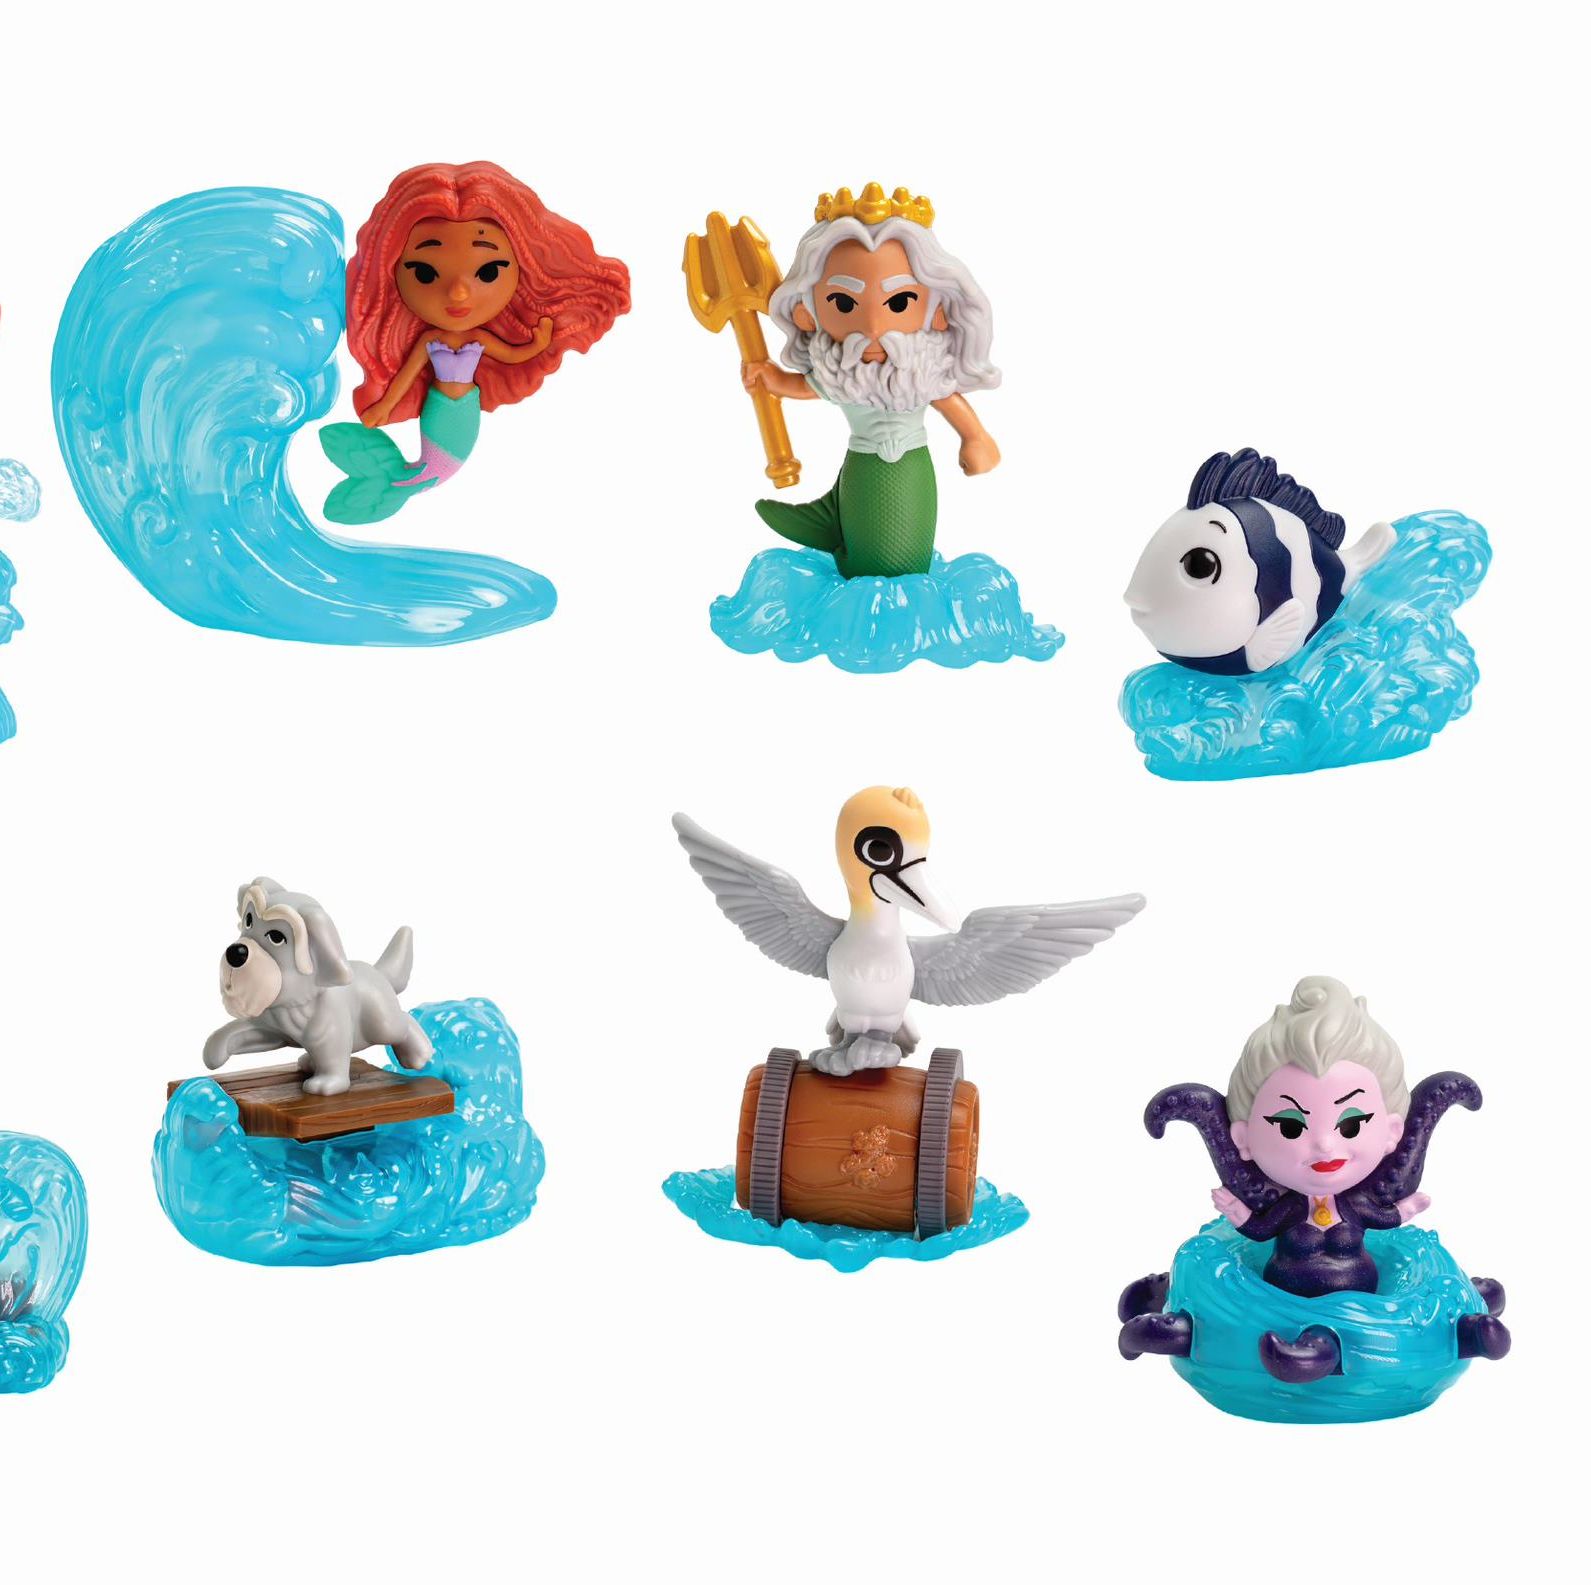 Grown Adults Are Losing It Over McDonald's Newest Happy Meal Toys